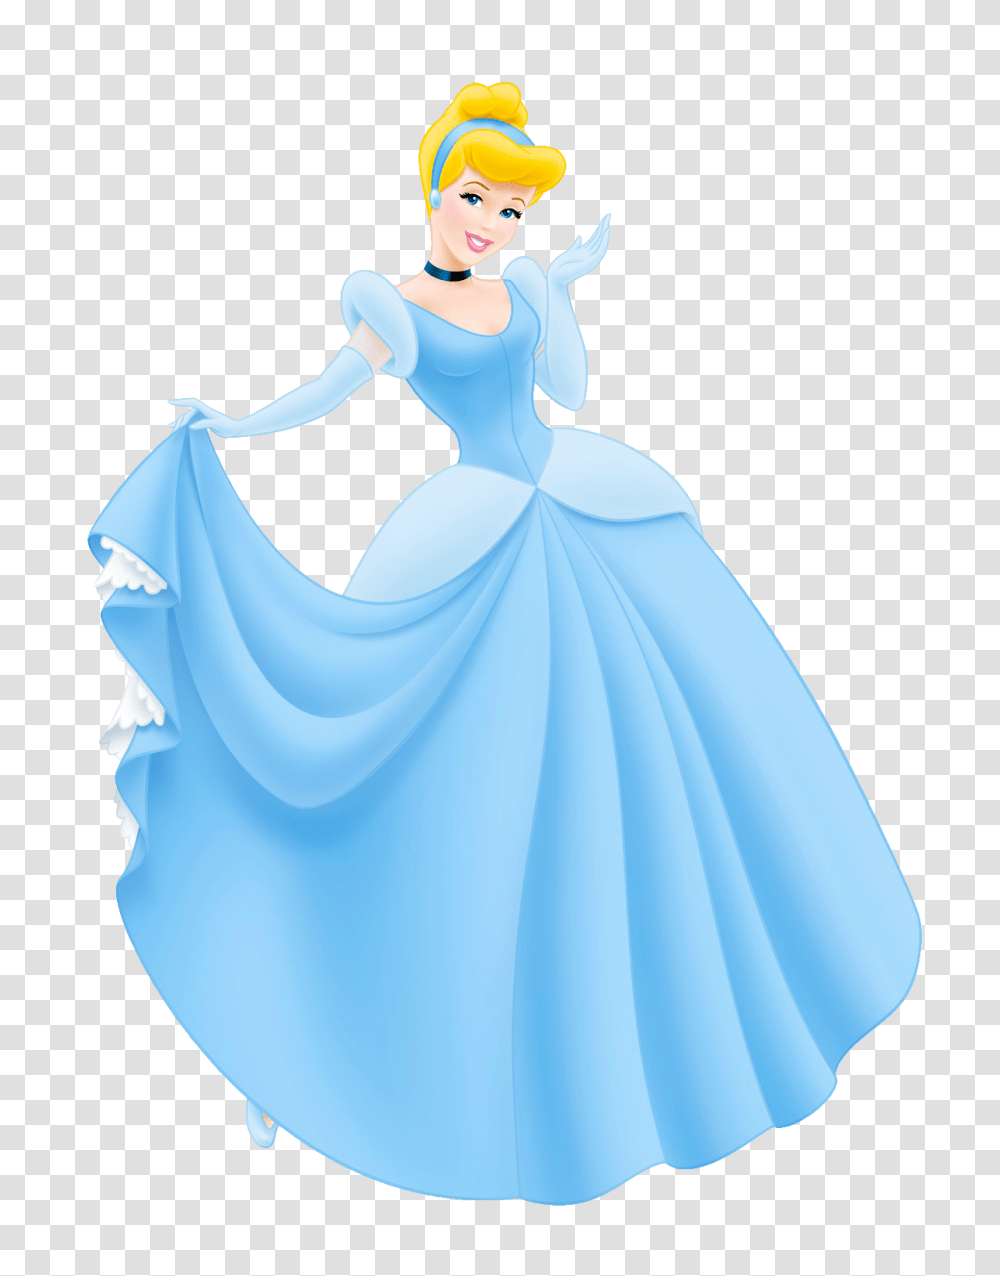 Image, Dance Pose, Leisure Activities, Wedding Gown Transparent Png